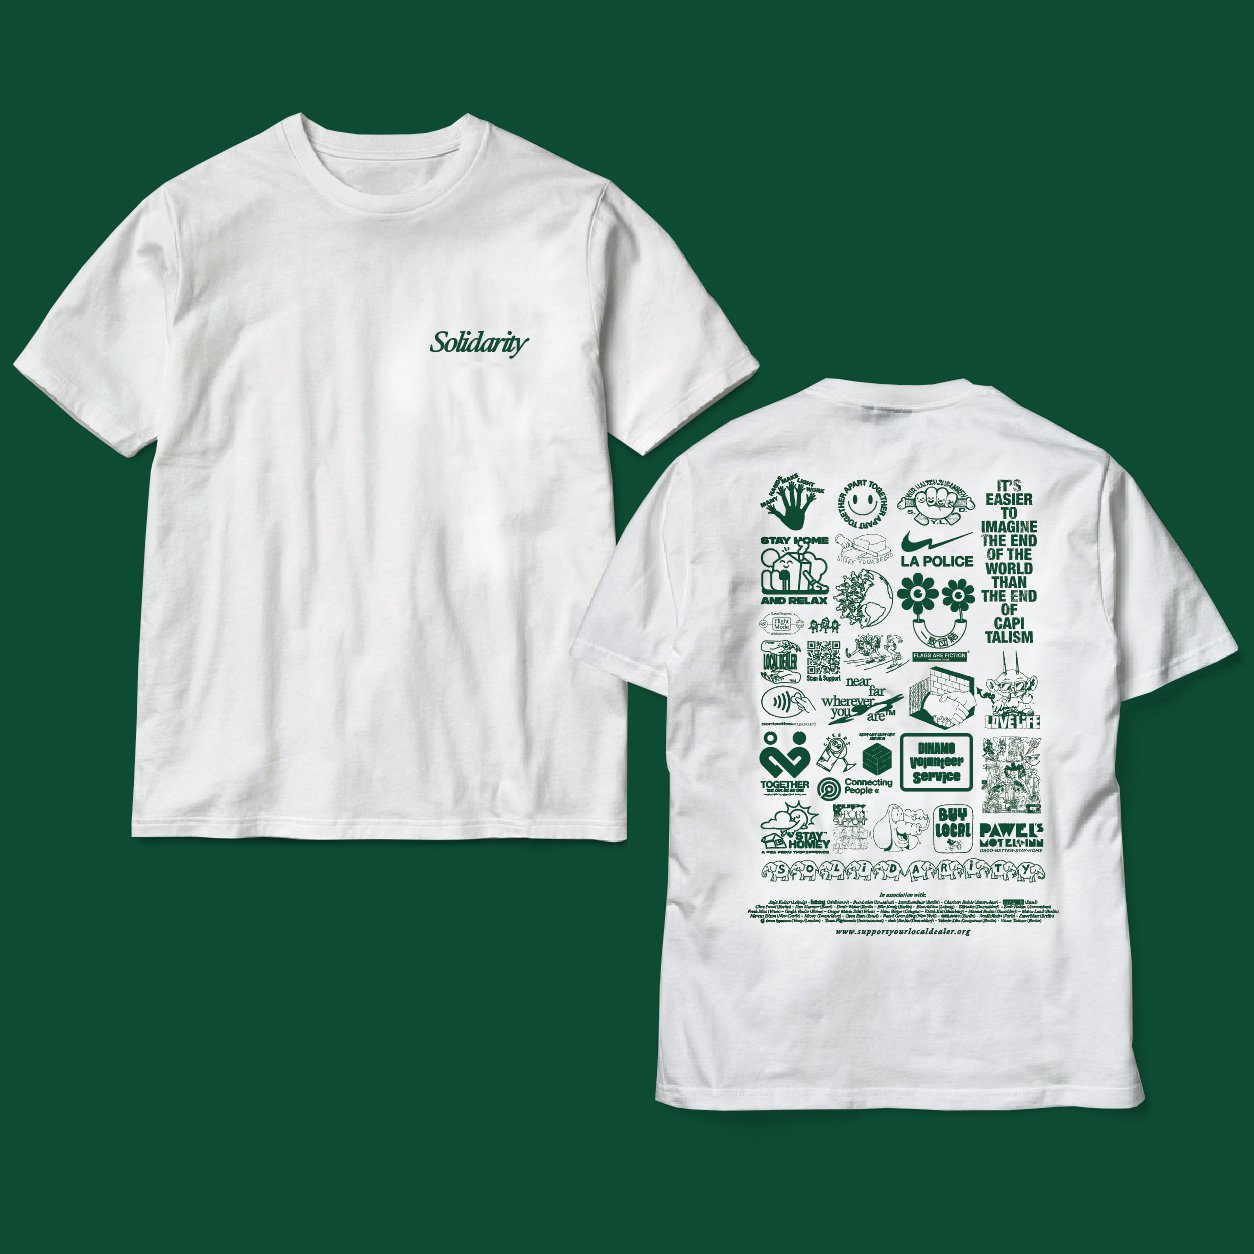 Bedenk Rudyard Kipling Overgang This T-shirt featuring logos by Eike König and Dinamo is raising thousands  for local businesses